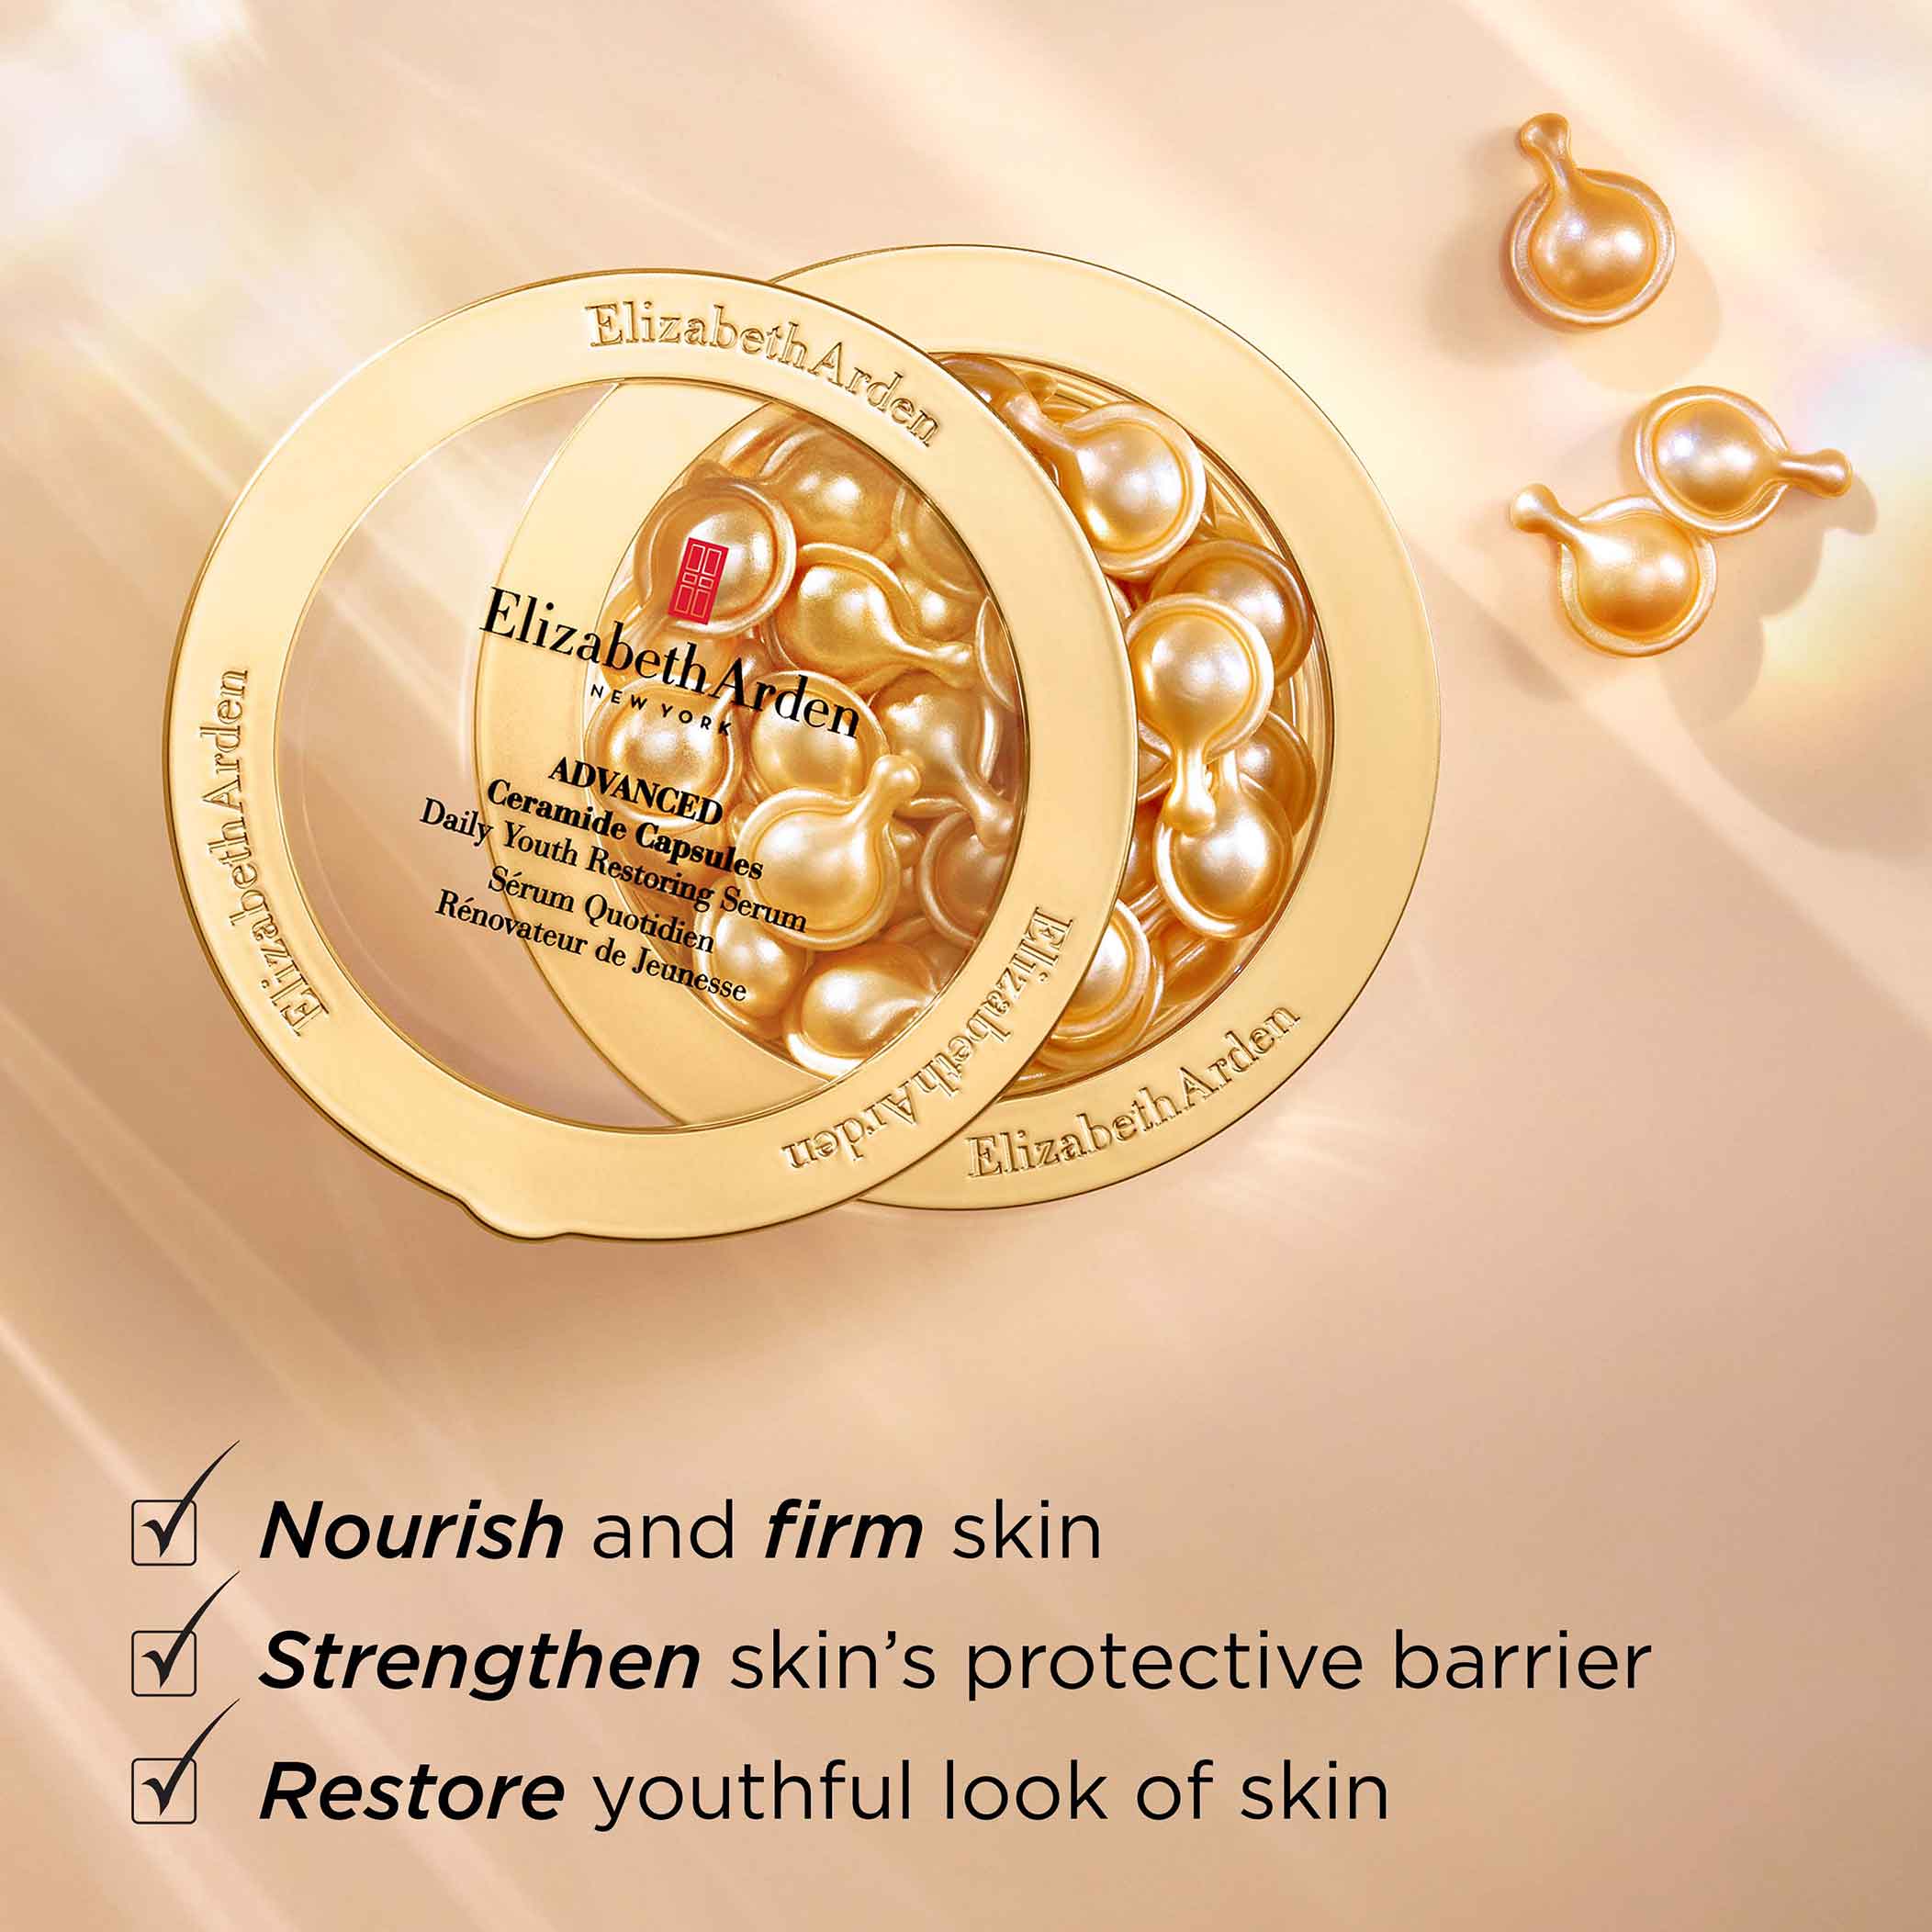 Nourish and firm skin, strengthen skin’s protective barrier and restore youthful look of skin